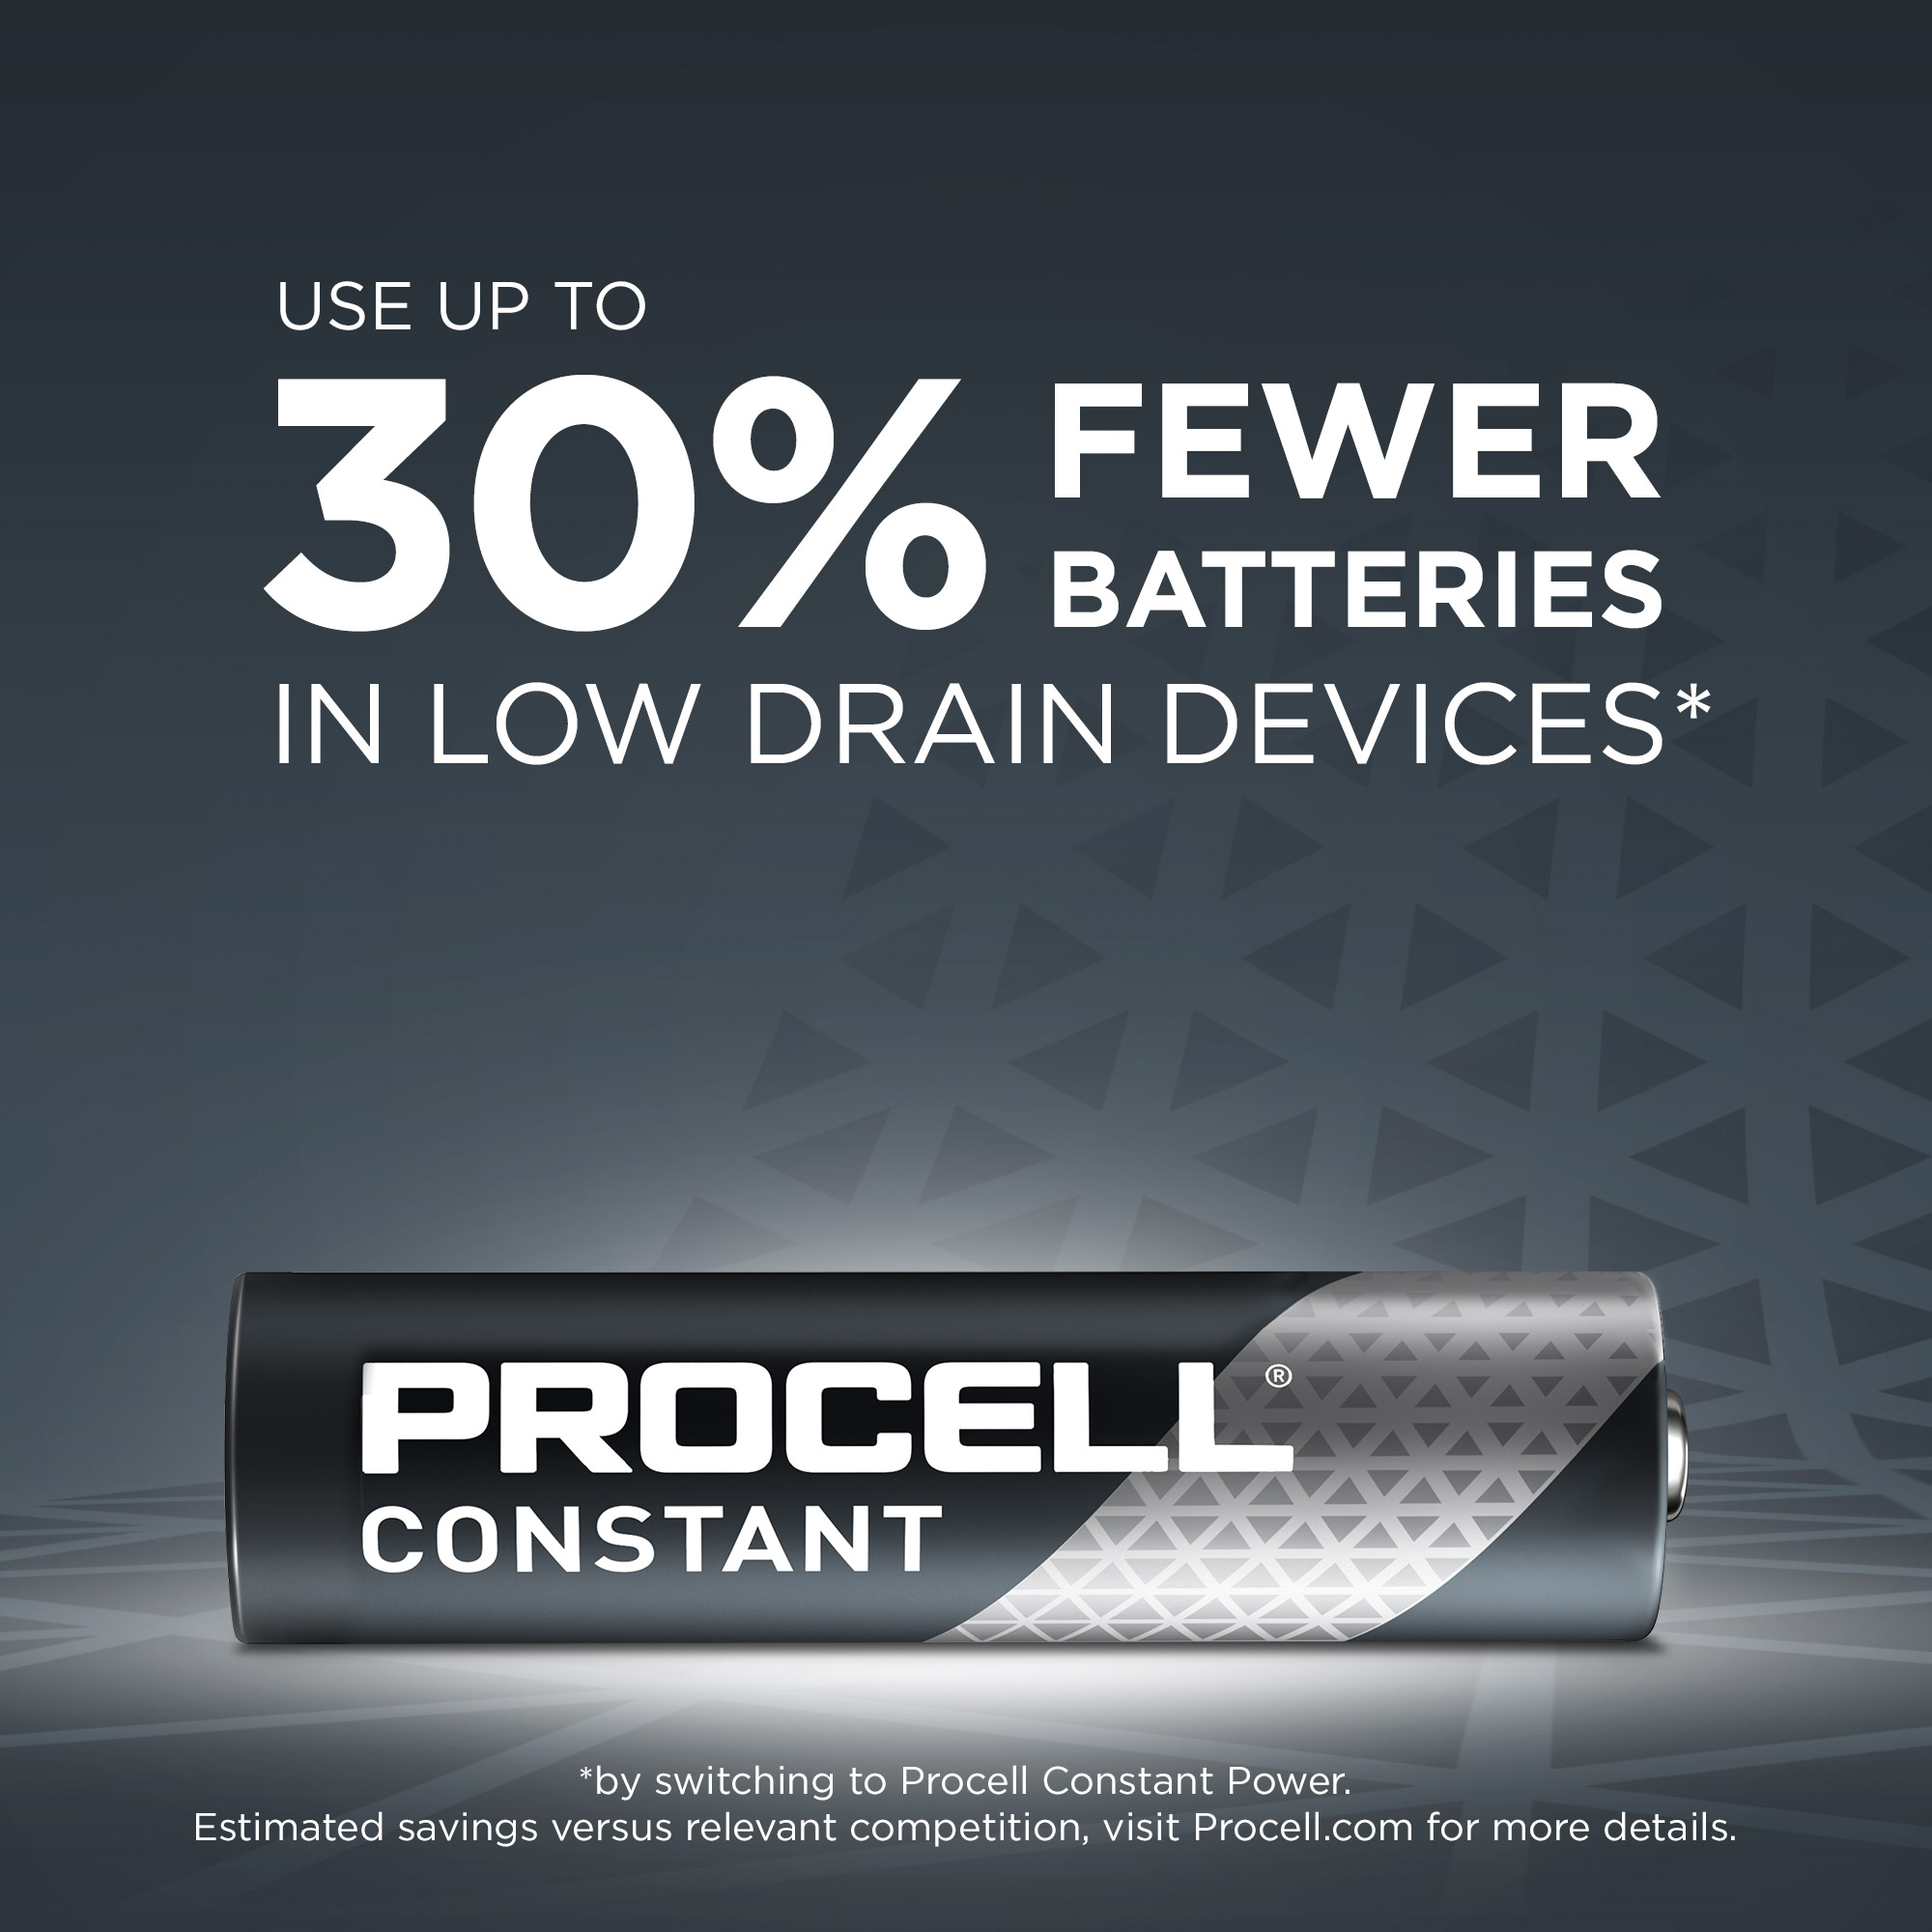 Procell AAA Batteries by Duracell - Marvel Lighting